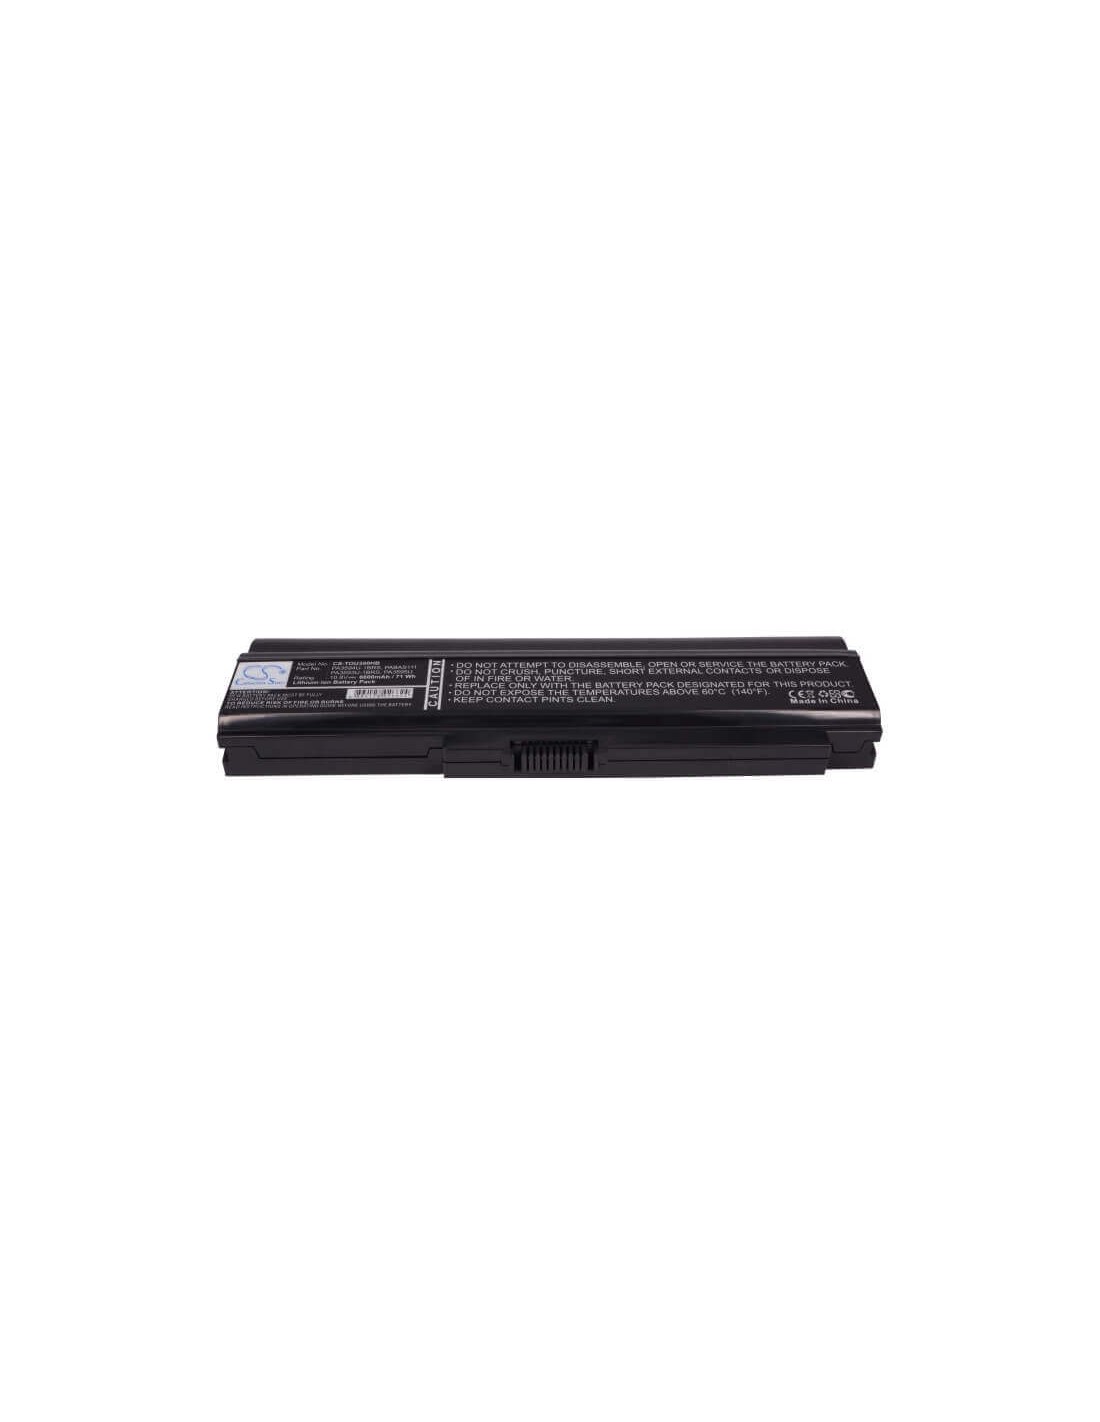 Black Battery for Toshiba Dynabook Cx/45c, Dynabook Cx/45d, Dynabook Cx/45e 10.8V, 6600mAh - 71.28Wh